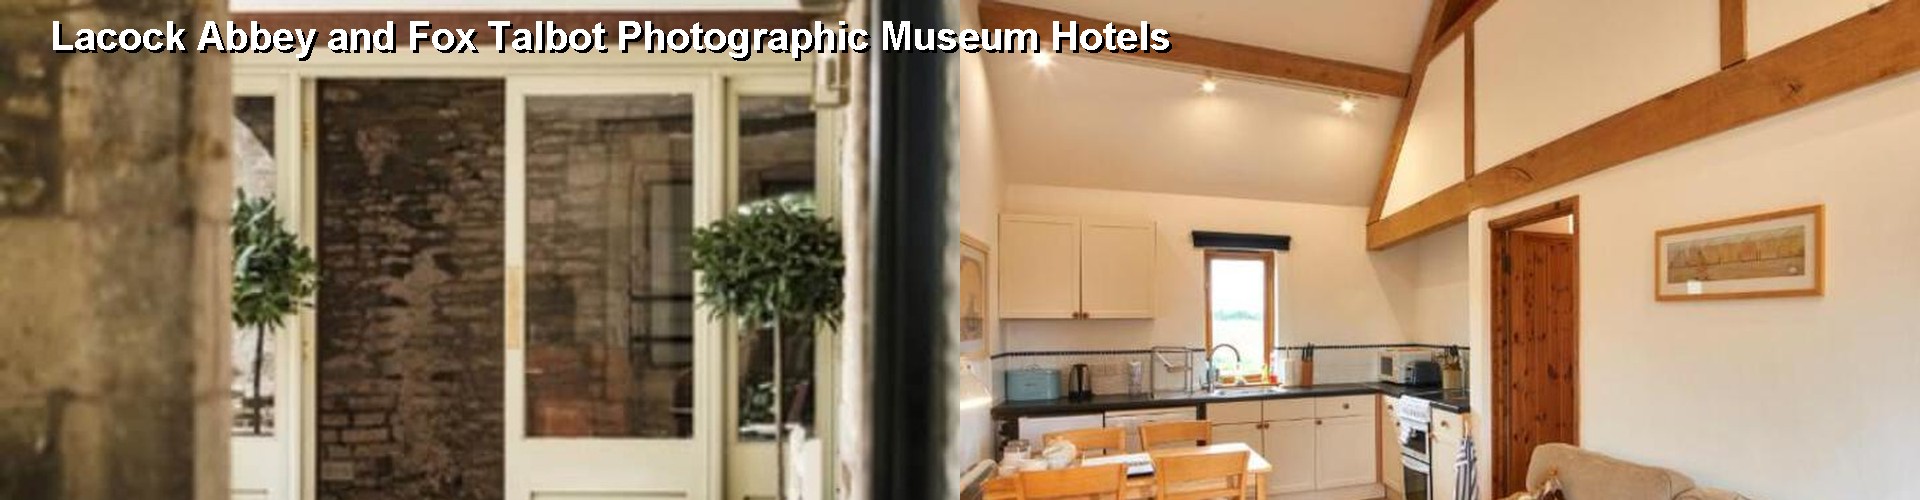 5 Best Hotels near Lacock Abbey and Fox Talbot Photographic Museum